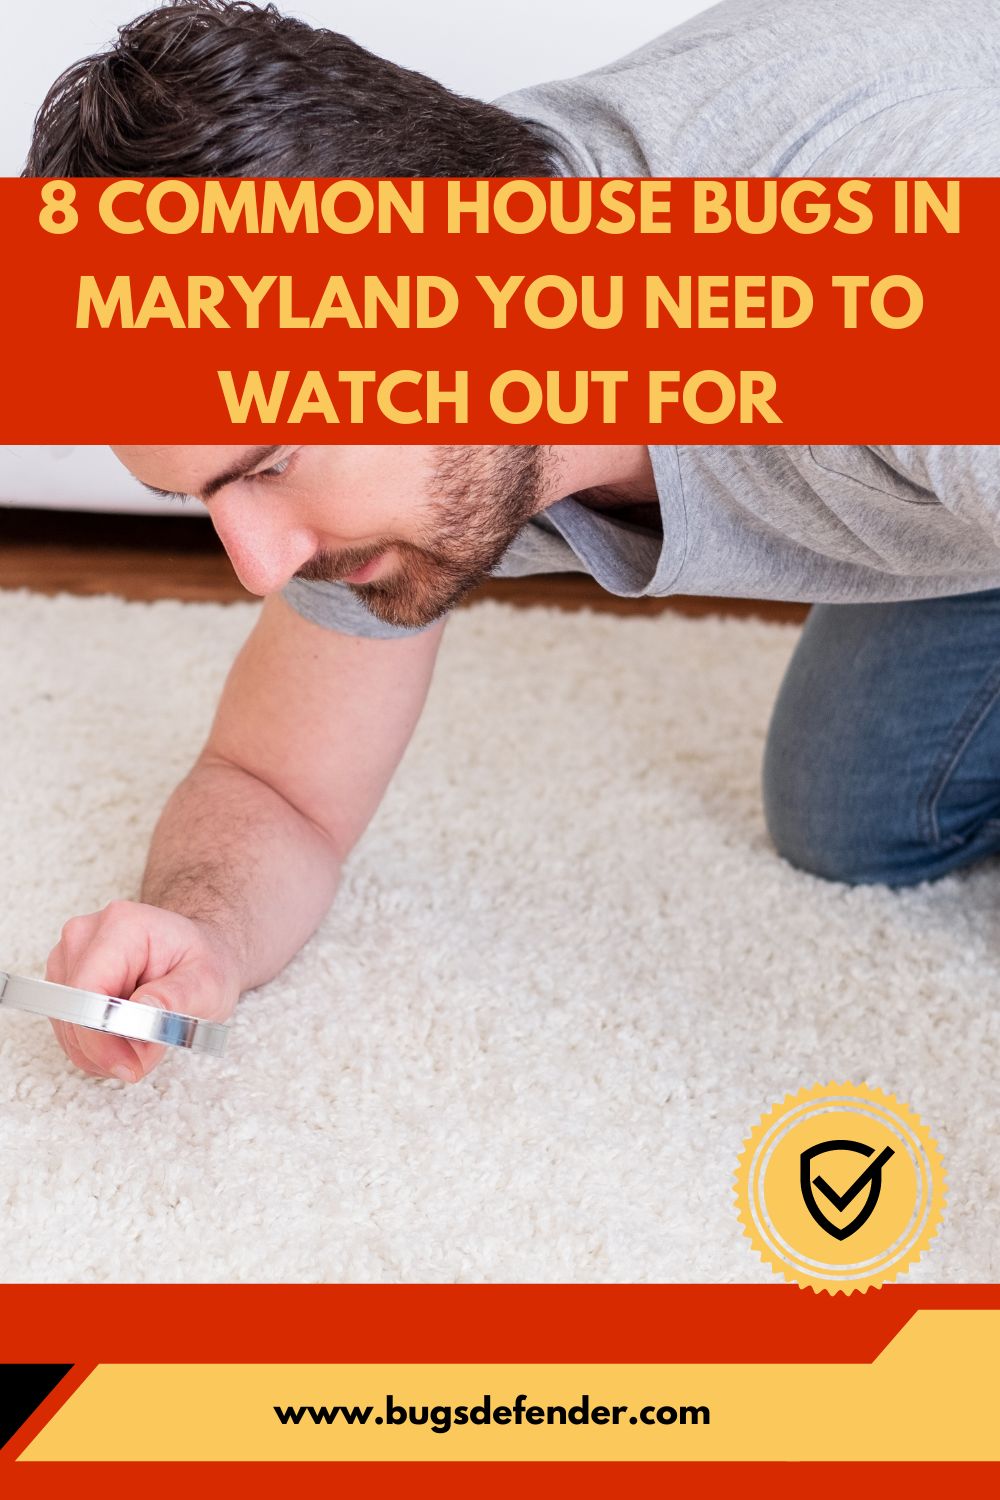 8 Common House Bugs In Maryland You Need To Watch Out For pin 1